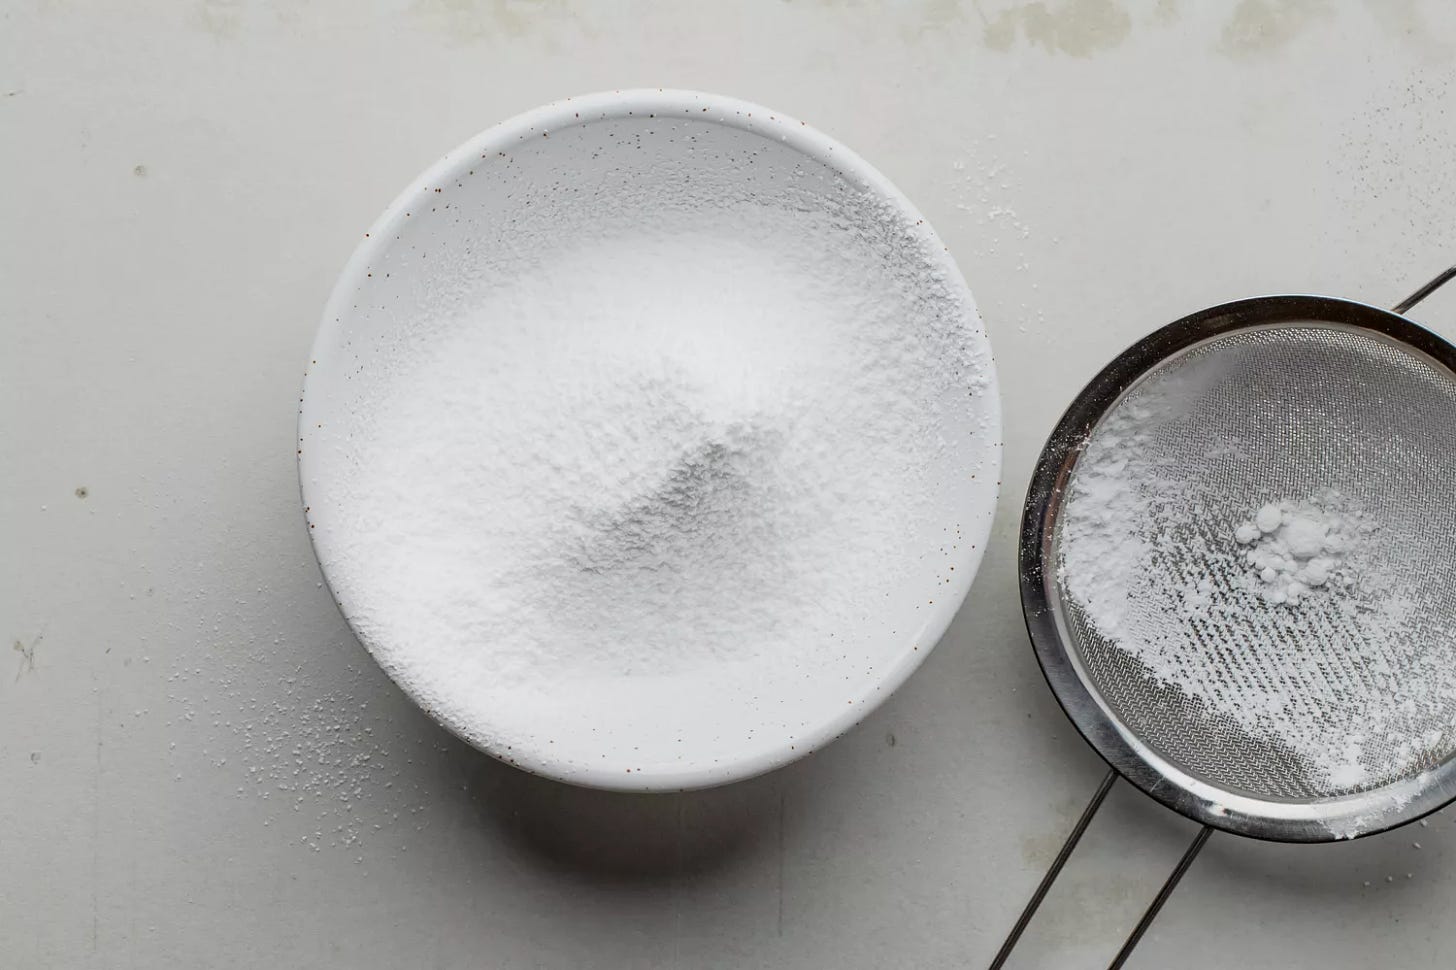 Confectioners' sugar sifted into bowl using a wire mesh sieve